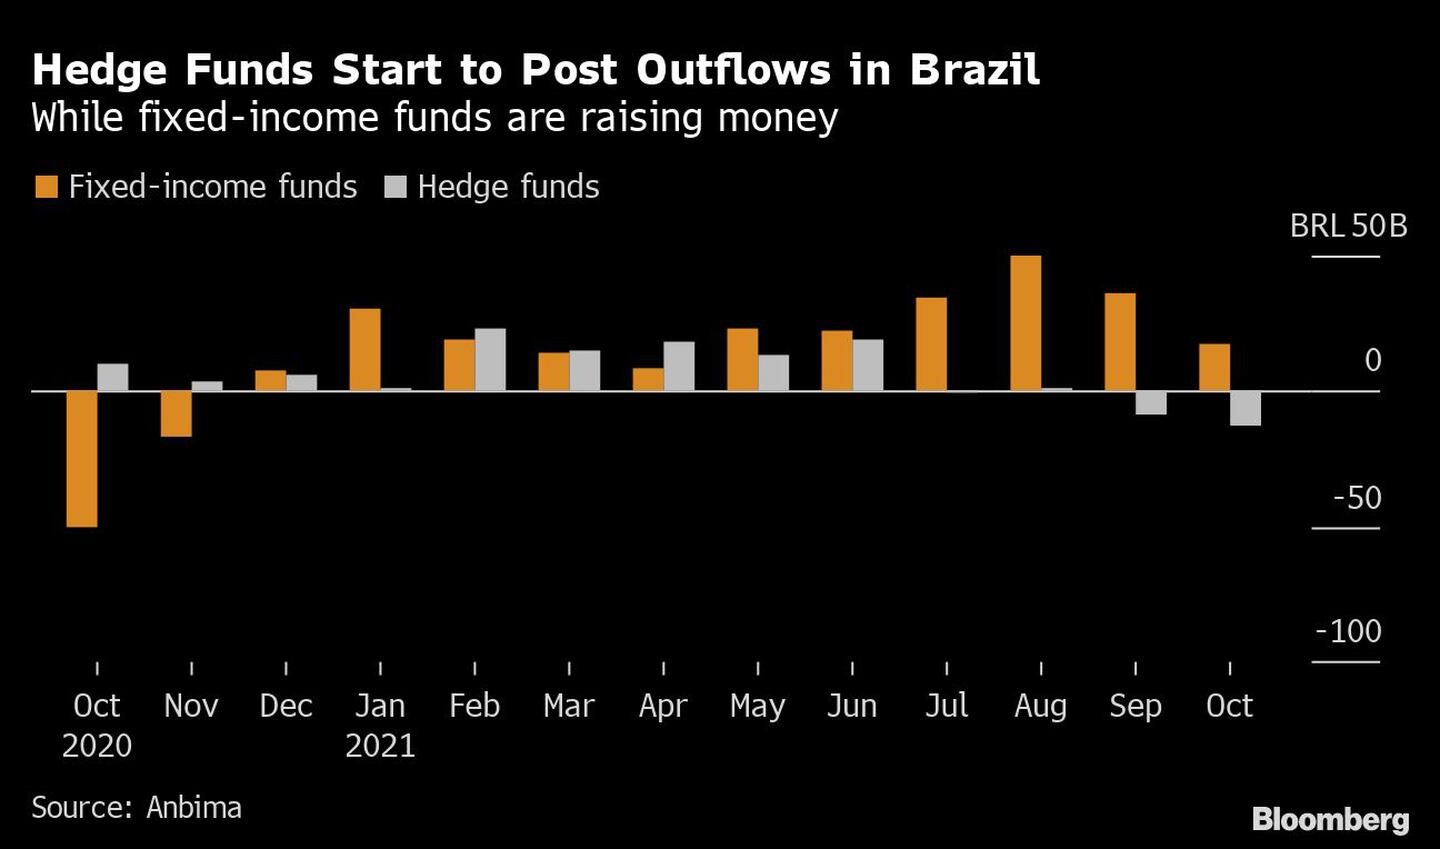 Hedge Funds Start to Post Outflows in Brazildfd